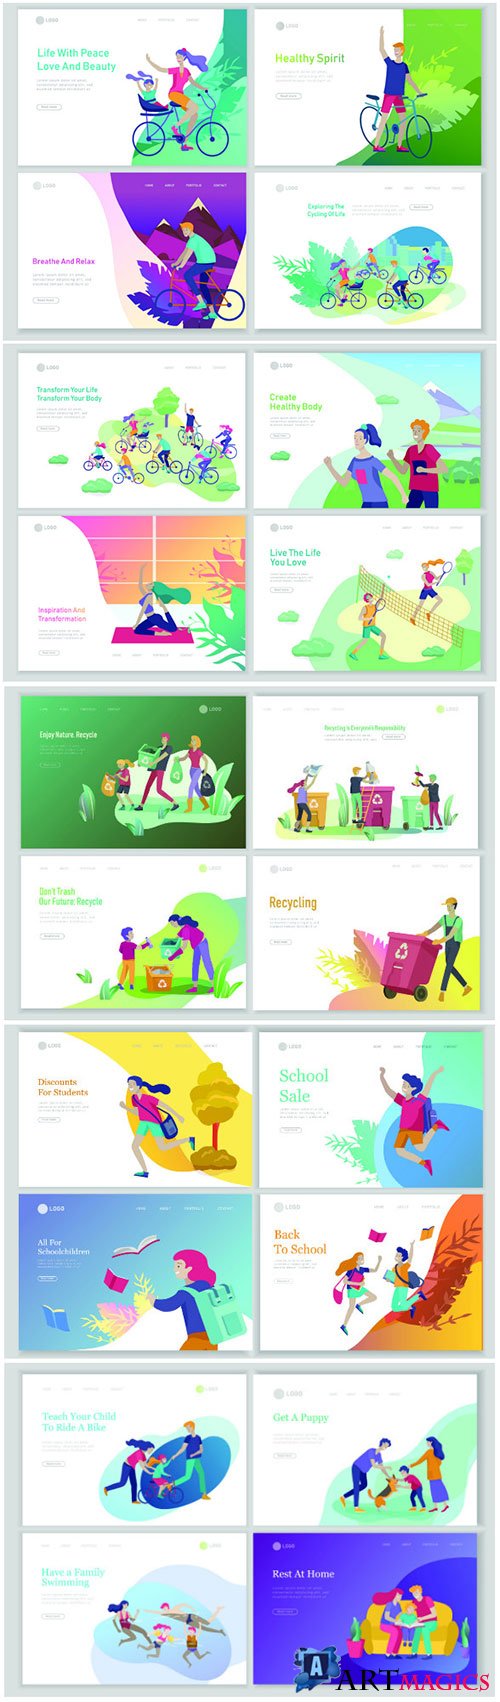 Website page isometric vector, flat banner concept illustration # 23